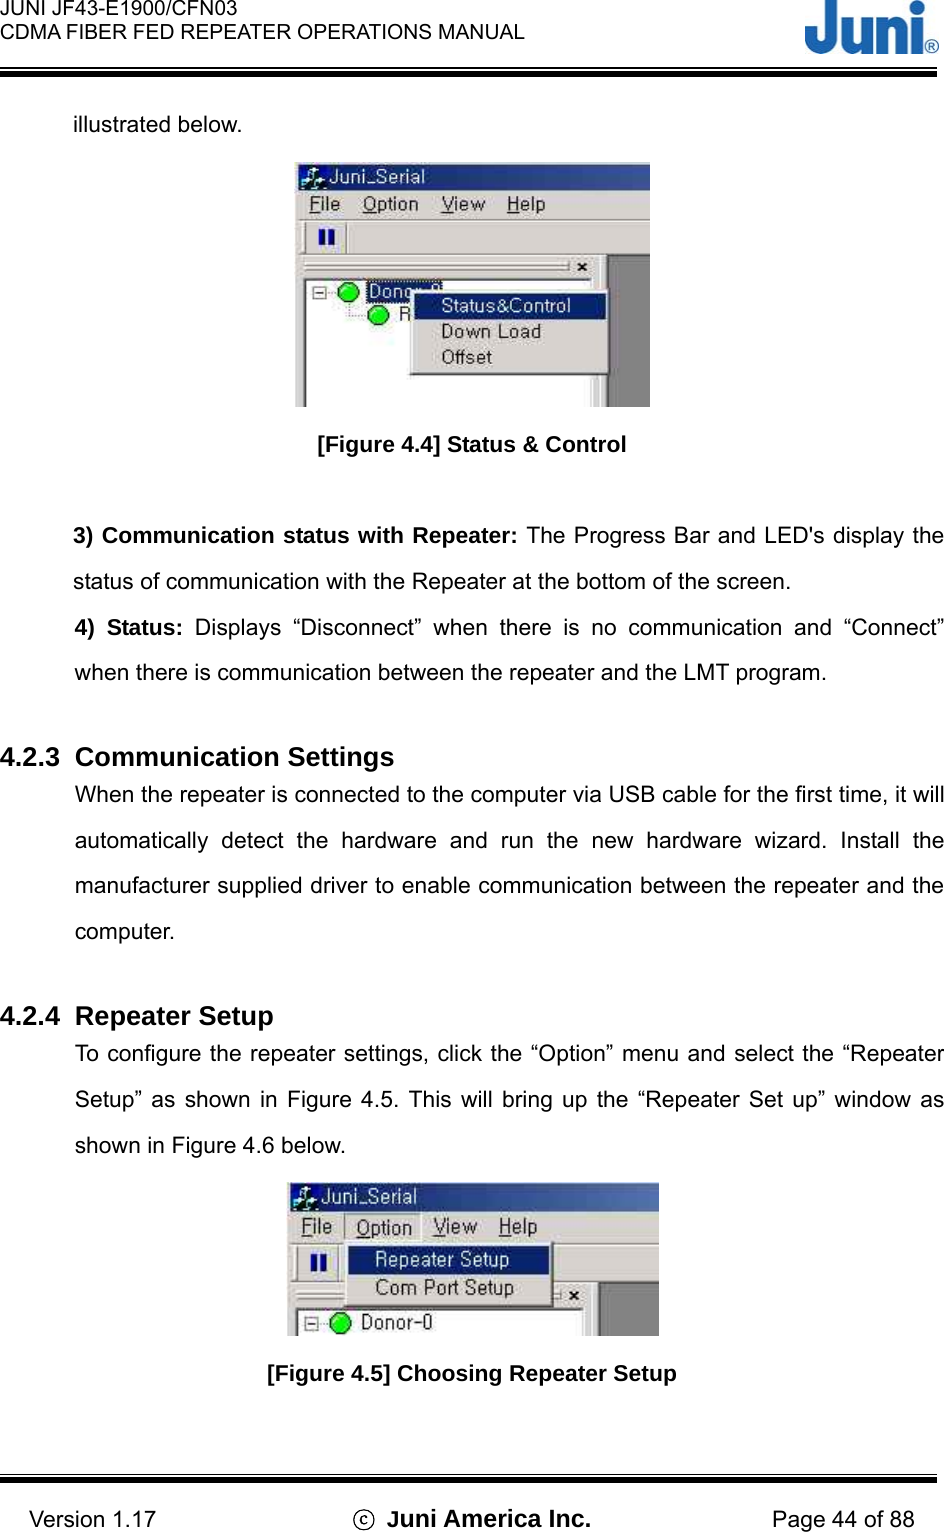  JUNI JF43-E1900/CFN03 CDMA FIBER FED REPEATER OPERATIONS MANUAL                                    Version 1.17  ⓒ Juni America Inc. Page 44 of 88 illustrated below.    [Figure 4.4] Status &amp; Control  3) Communication status with Repeater: The Progress Bar and LED&apos;s display the status of communication with the Repeater at the bottom of the screen. 4) Status: Displays “Disconnect” when there is no communication and “Connect” when there is communication between the repeater and the LMT program.    4.2.3 Communication Settings When the repeater is connected to the computer via USB cable for the first time, it will automatically detect the hardware and run the new hardware wizard. Install the manufacturer supplied driver to enable communication between the repeater and the computer.   4.2.4 Repeater Setup To configure the repeater settings, click the “Option” menu and select the “Repeater Setup” as shown in Figure 4.5. This will bring up the “Repeater Set up” window as shown in Figure 4.6 below.    [Figure 4.5] Choosing Repeater Setup  